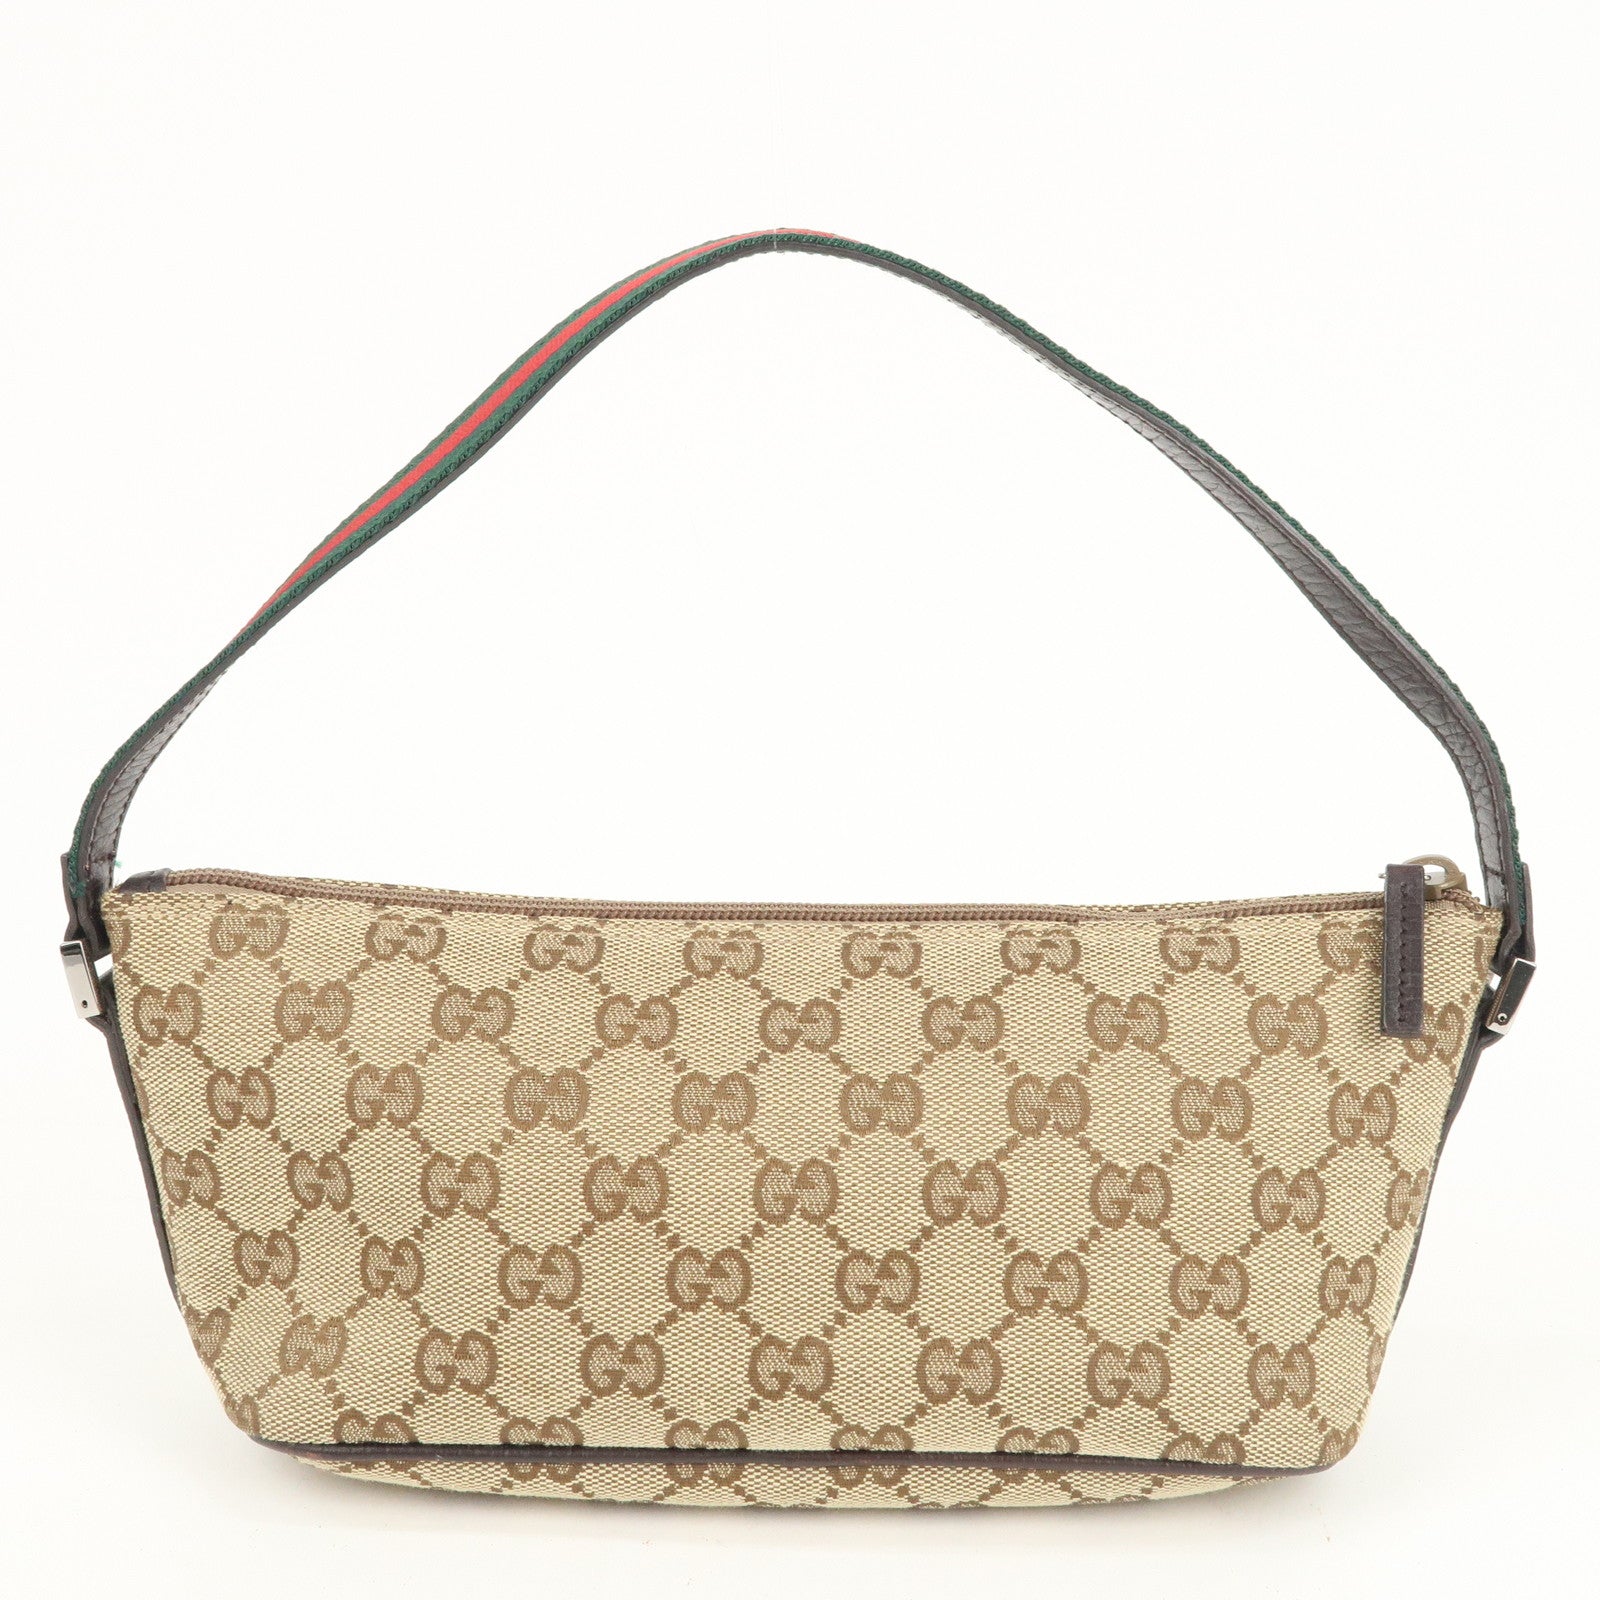 GUCCI-Sherry-GG-Canvas-Leather-Pouch-Hand-Bag-Black-141809 – dct-ep_vintage  luxury Store